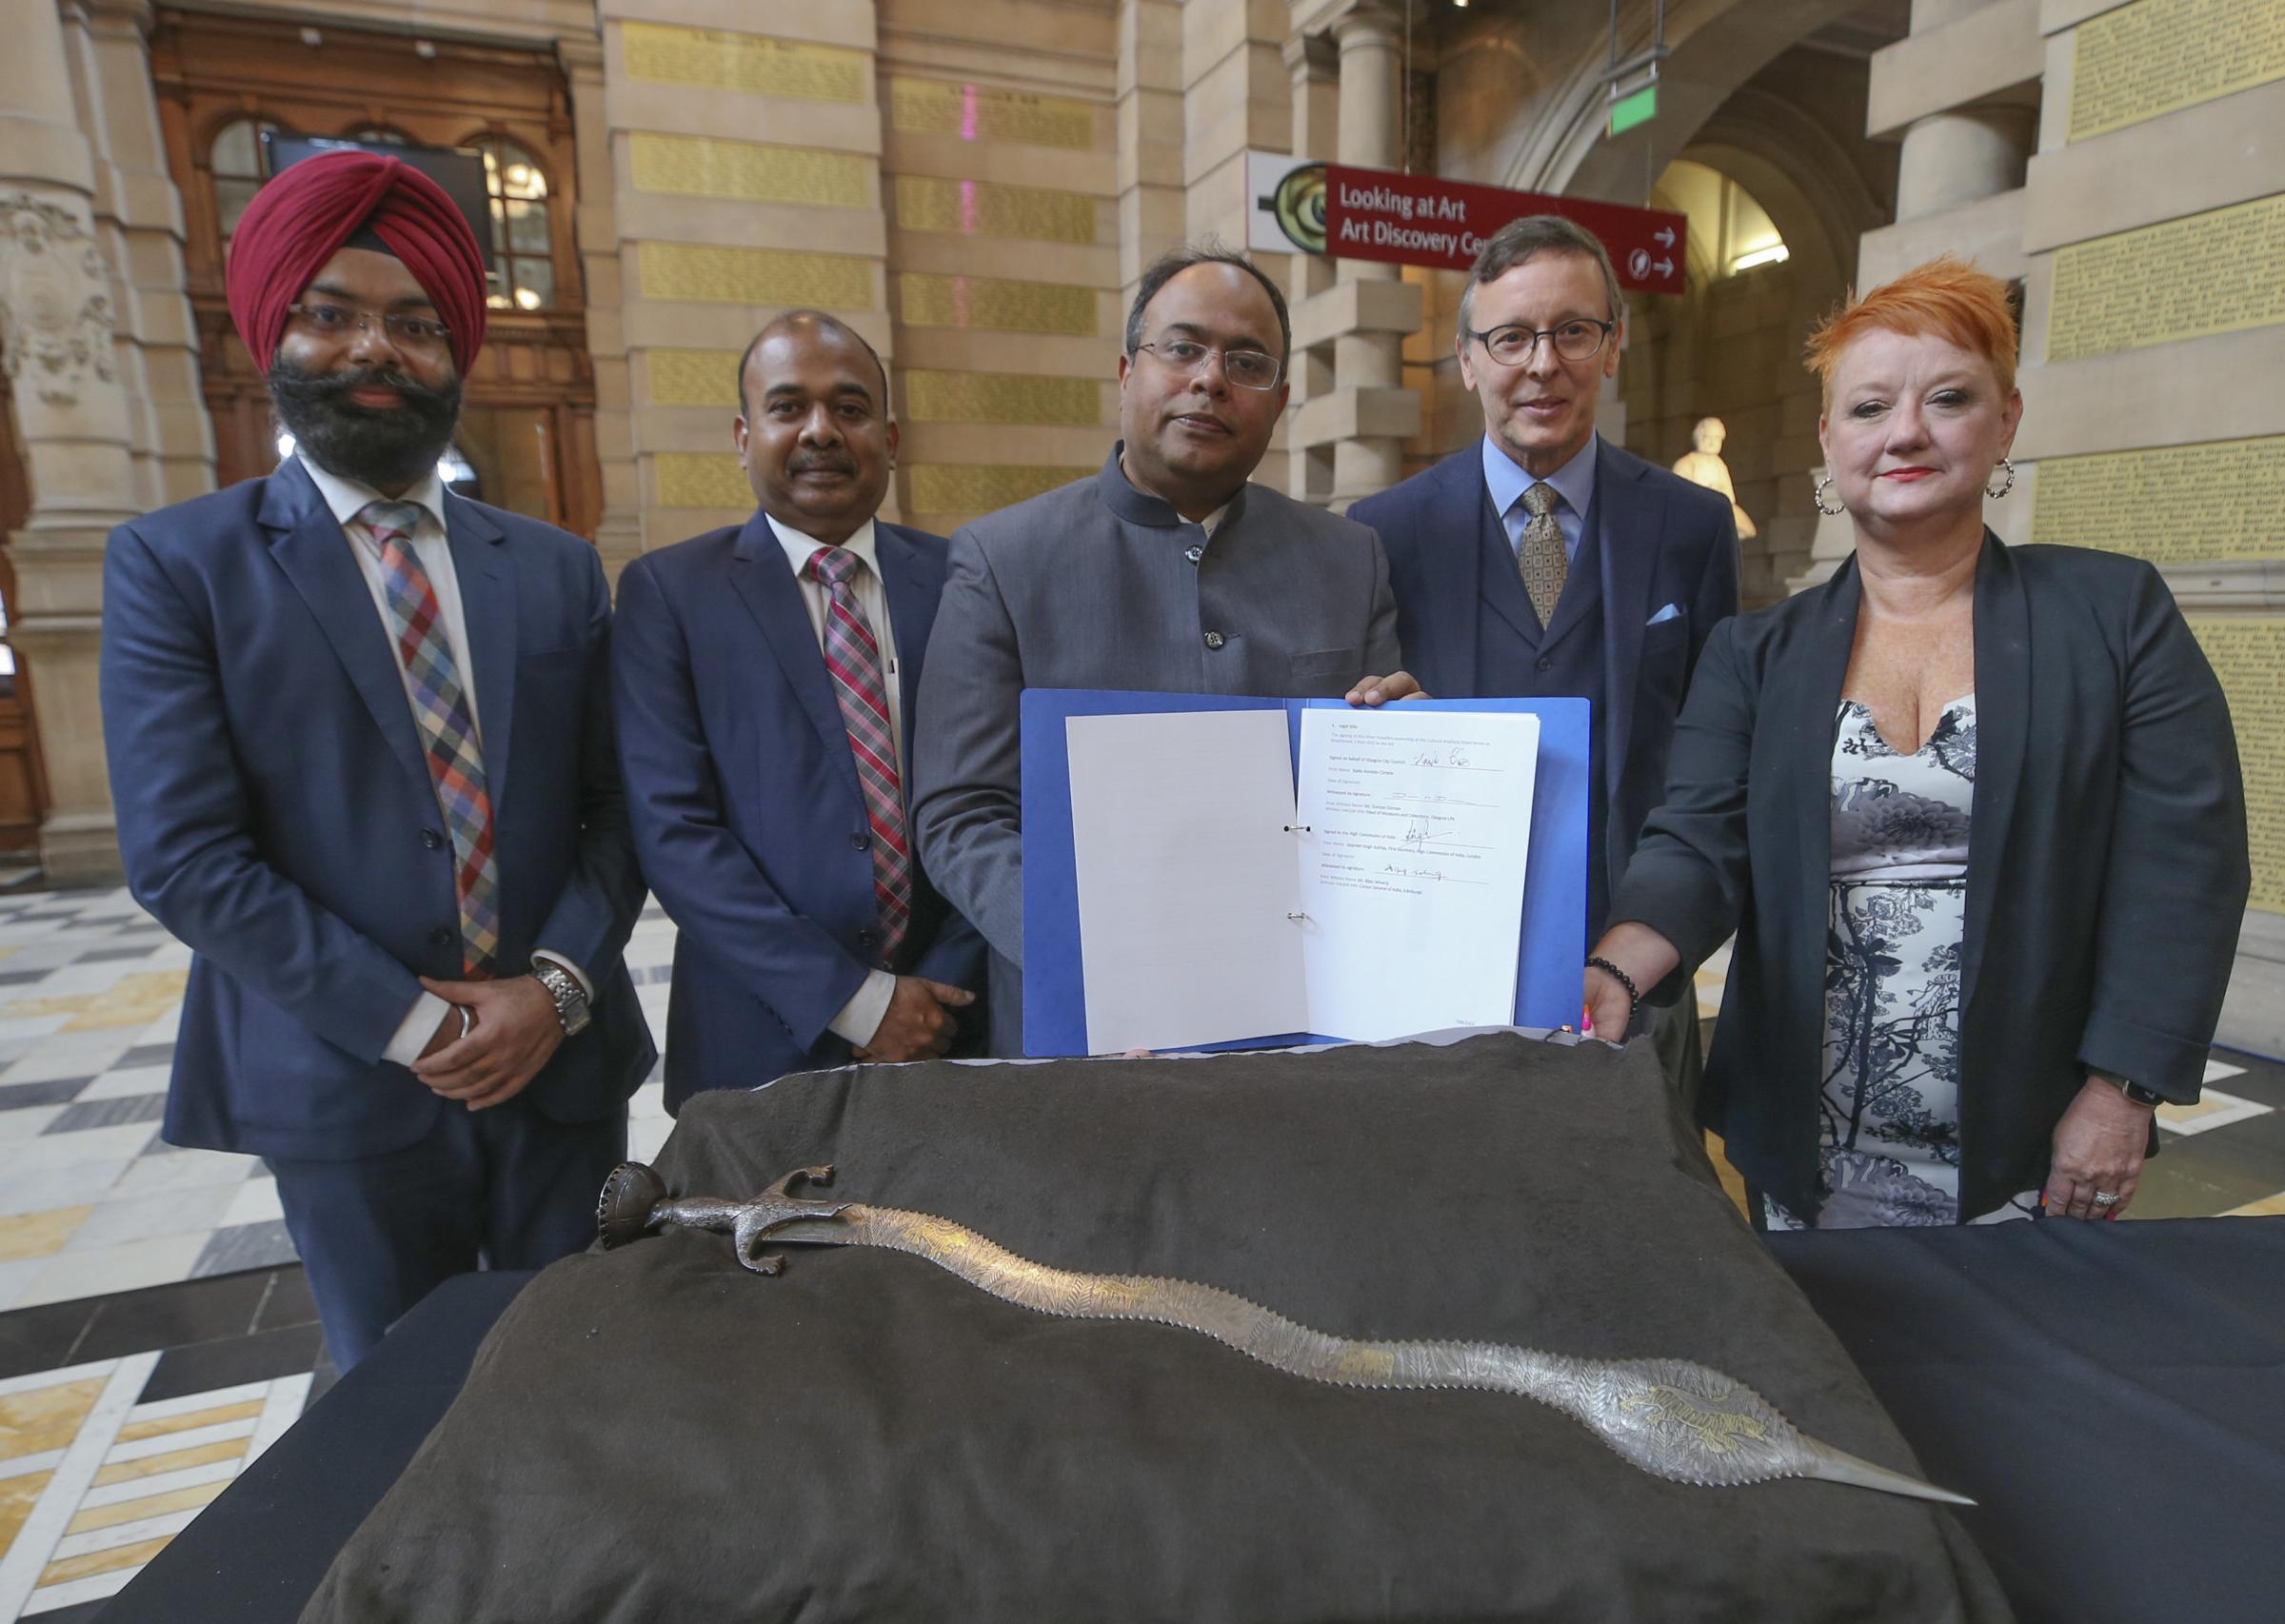 A signing ceremony at Kelvingrove Art Gallery. Left to right Jaspreet Sukhija, First Secretary High Commission of India, Vijay Selvaraj, Consul General of India, Sujit Ghosh acting high commissioner of India, Duncan Dornan Head of Museums and collections